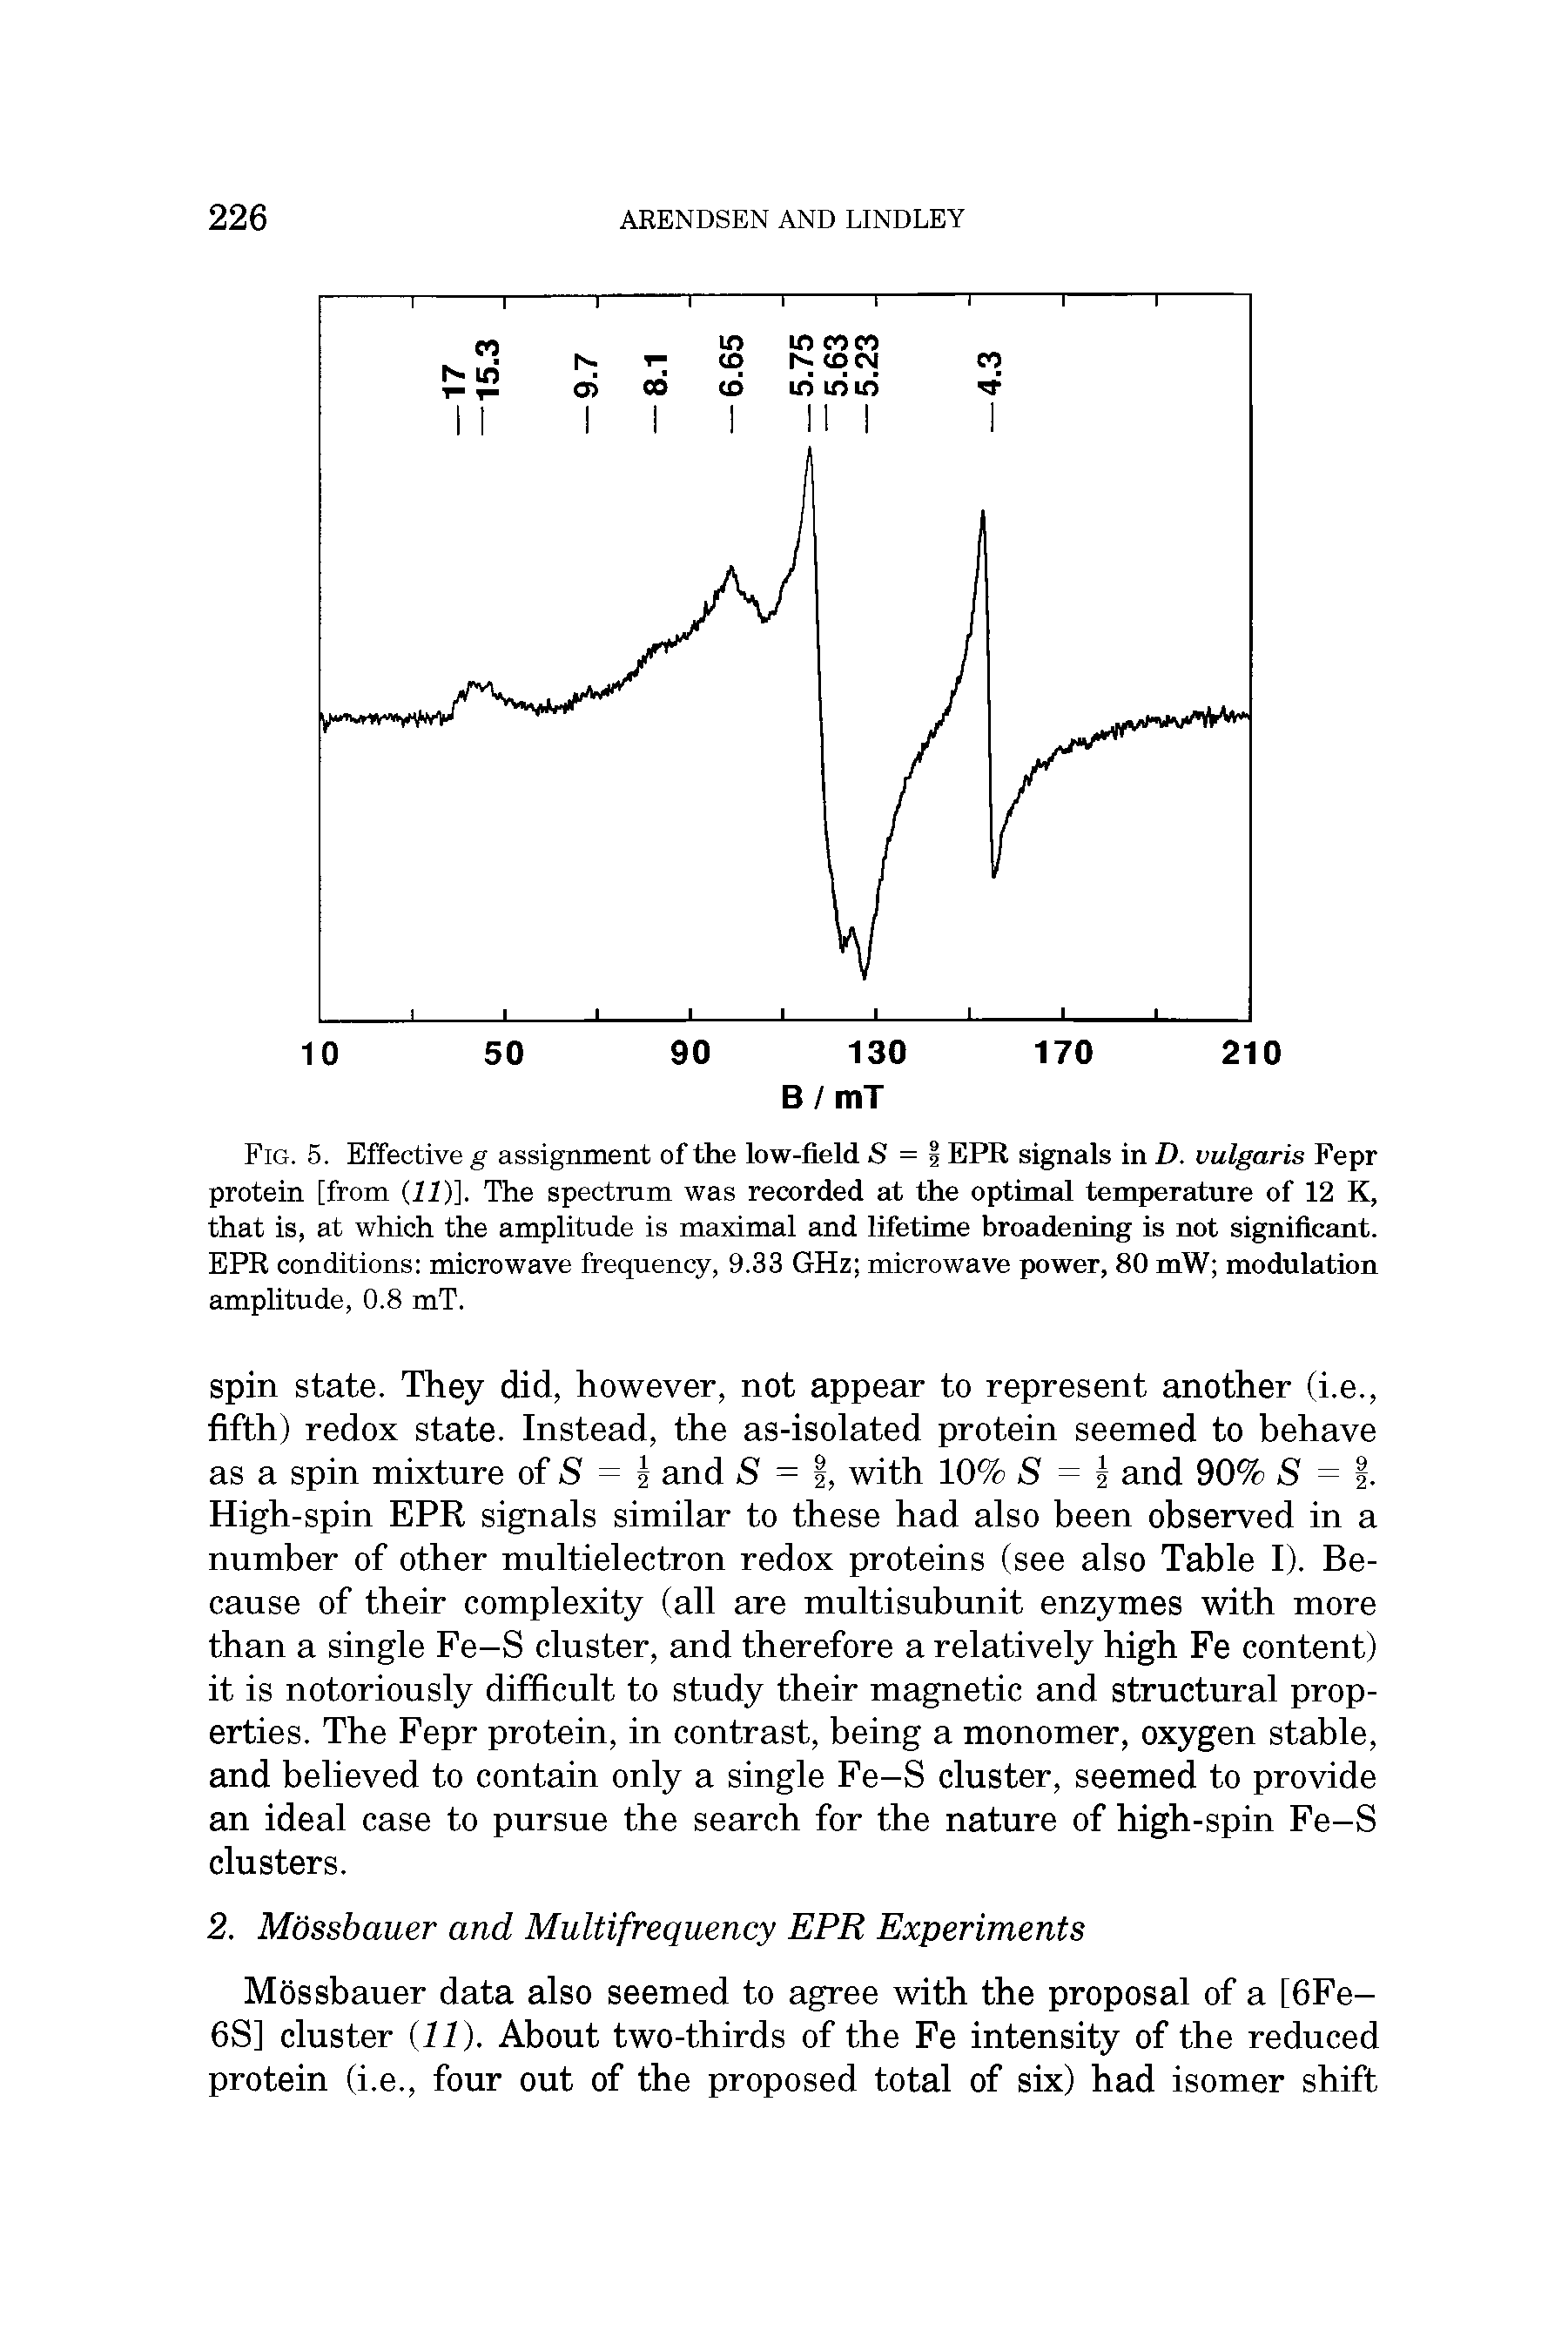 Fig. 5. Effective g assignment of the low-field S = IEPR signals in D. vulgaris Fepr protein [from 11)]. The spectrum was recorded at the optimEd temperature of 12 K, that is, at which the amplitude is maximal and lifetime broadening is not significEmt. EPR conditions microwave frequency, 9.33 GHz microwave power, 80 mW modulation amplitude, 0.8 mT.